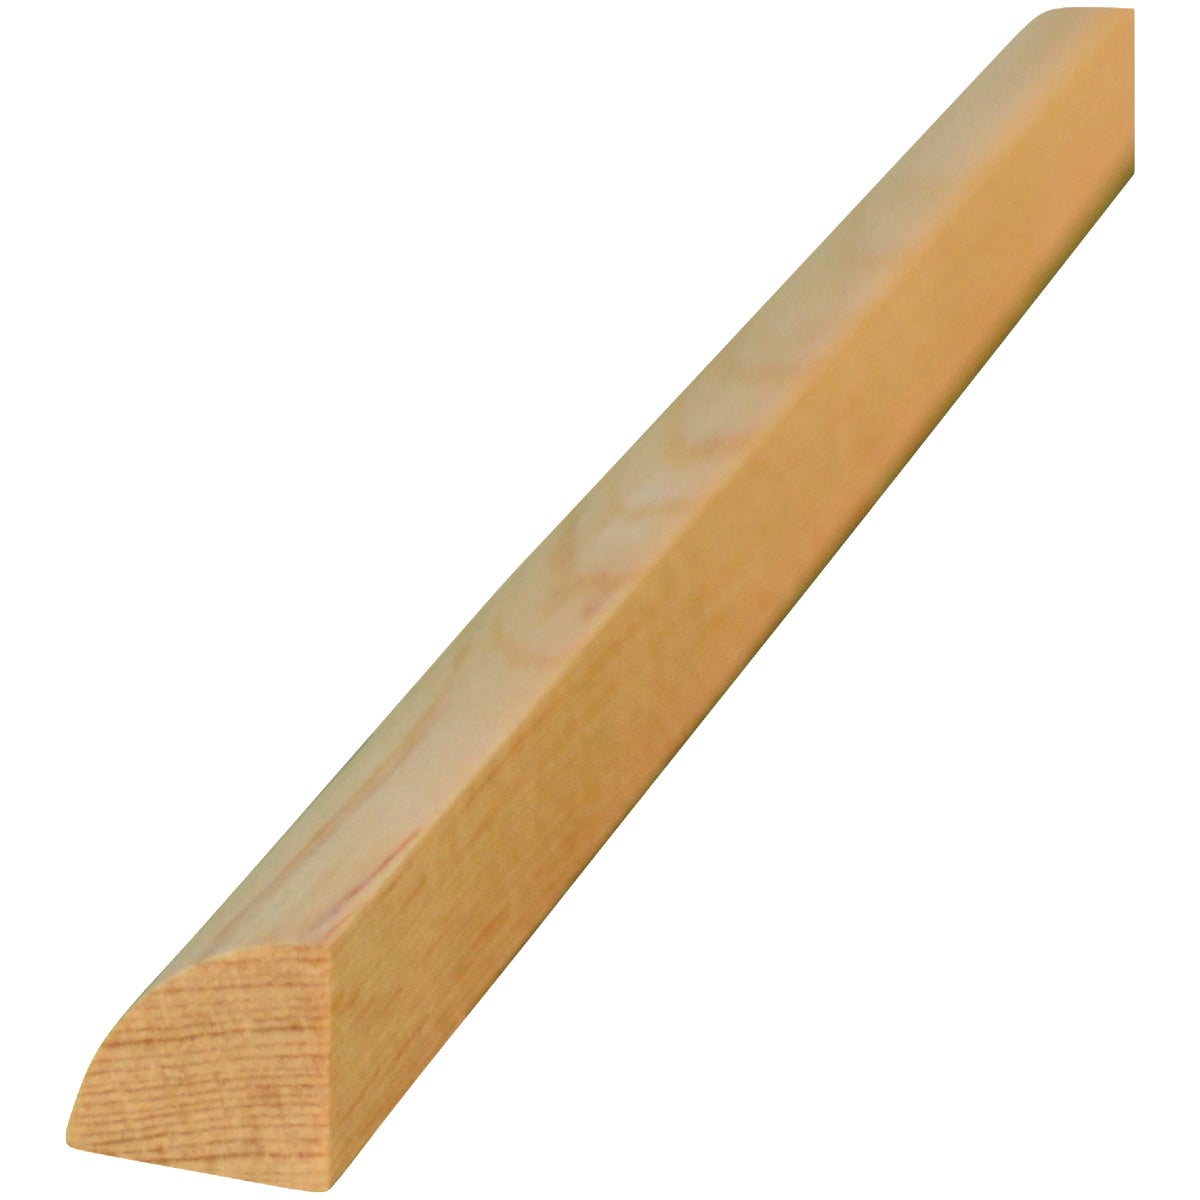 Alexandria Moulding 11/16 In. W. x 11/16 In. H. x 8 Ft. L. Solid Pine Quarter Round Molding